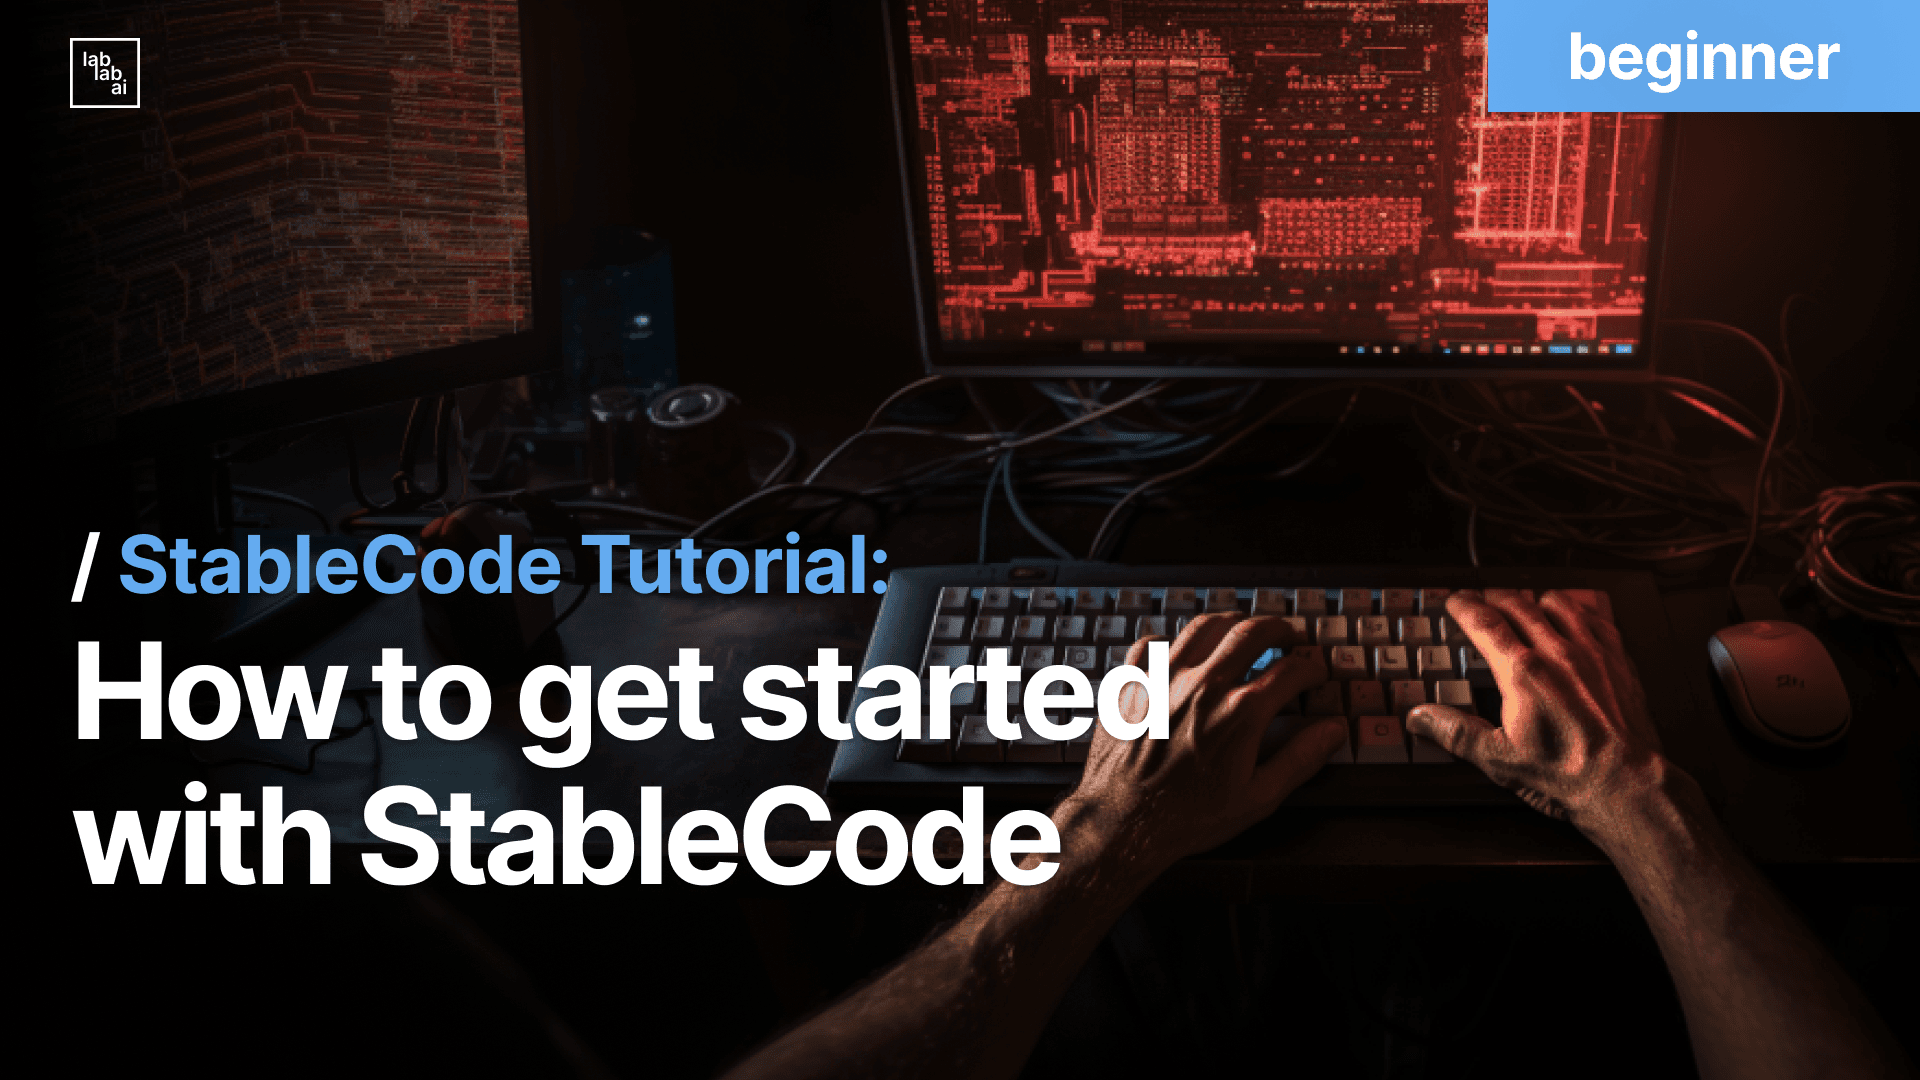 StableCode Tutorial: How to get started with StableCode